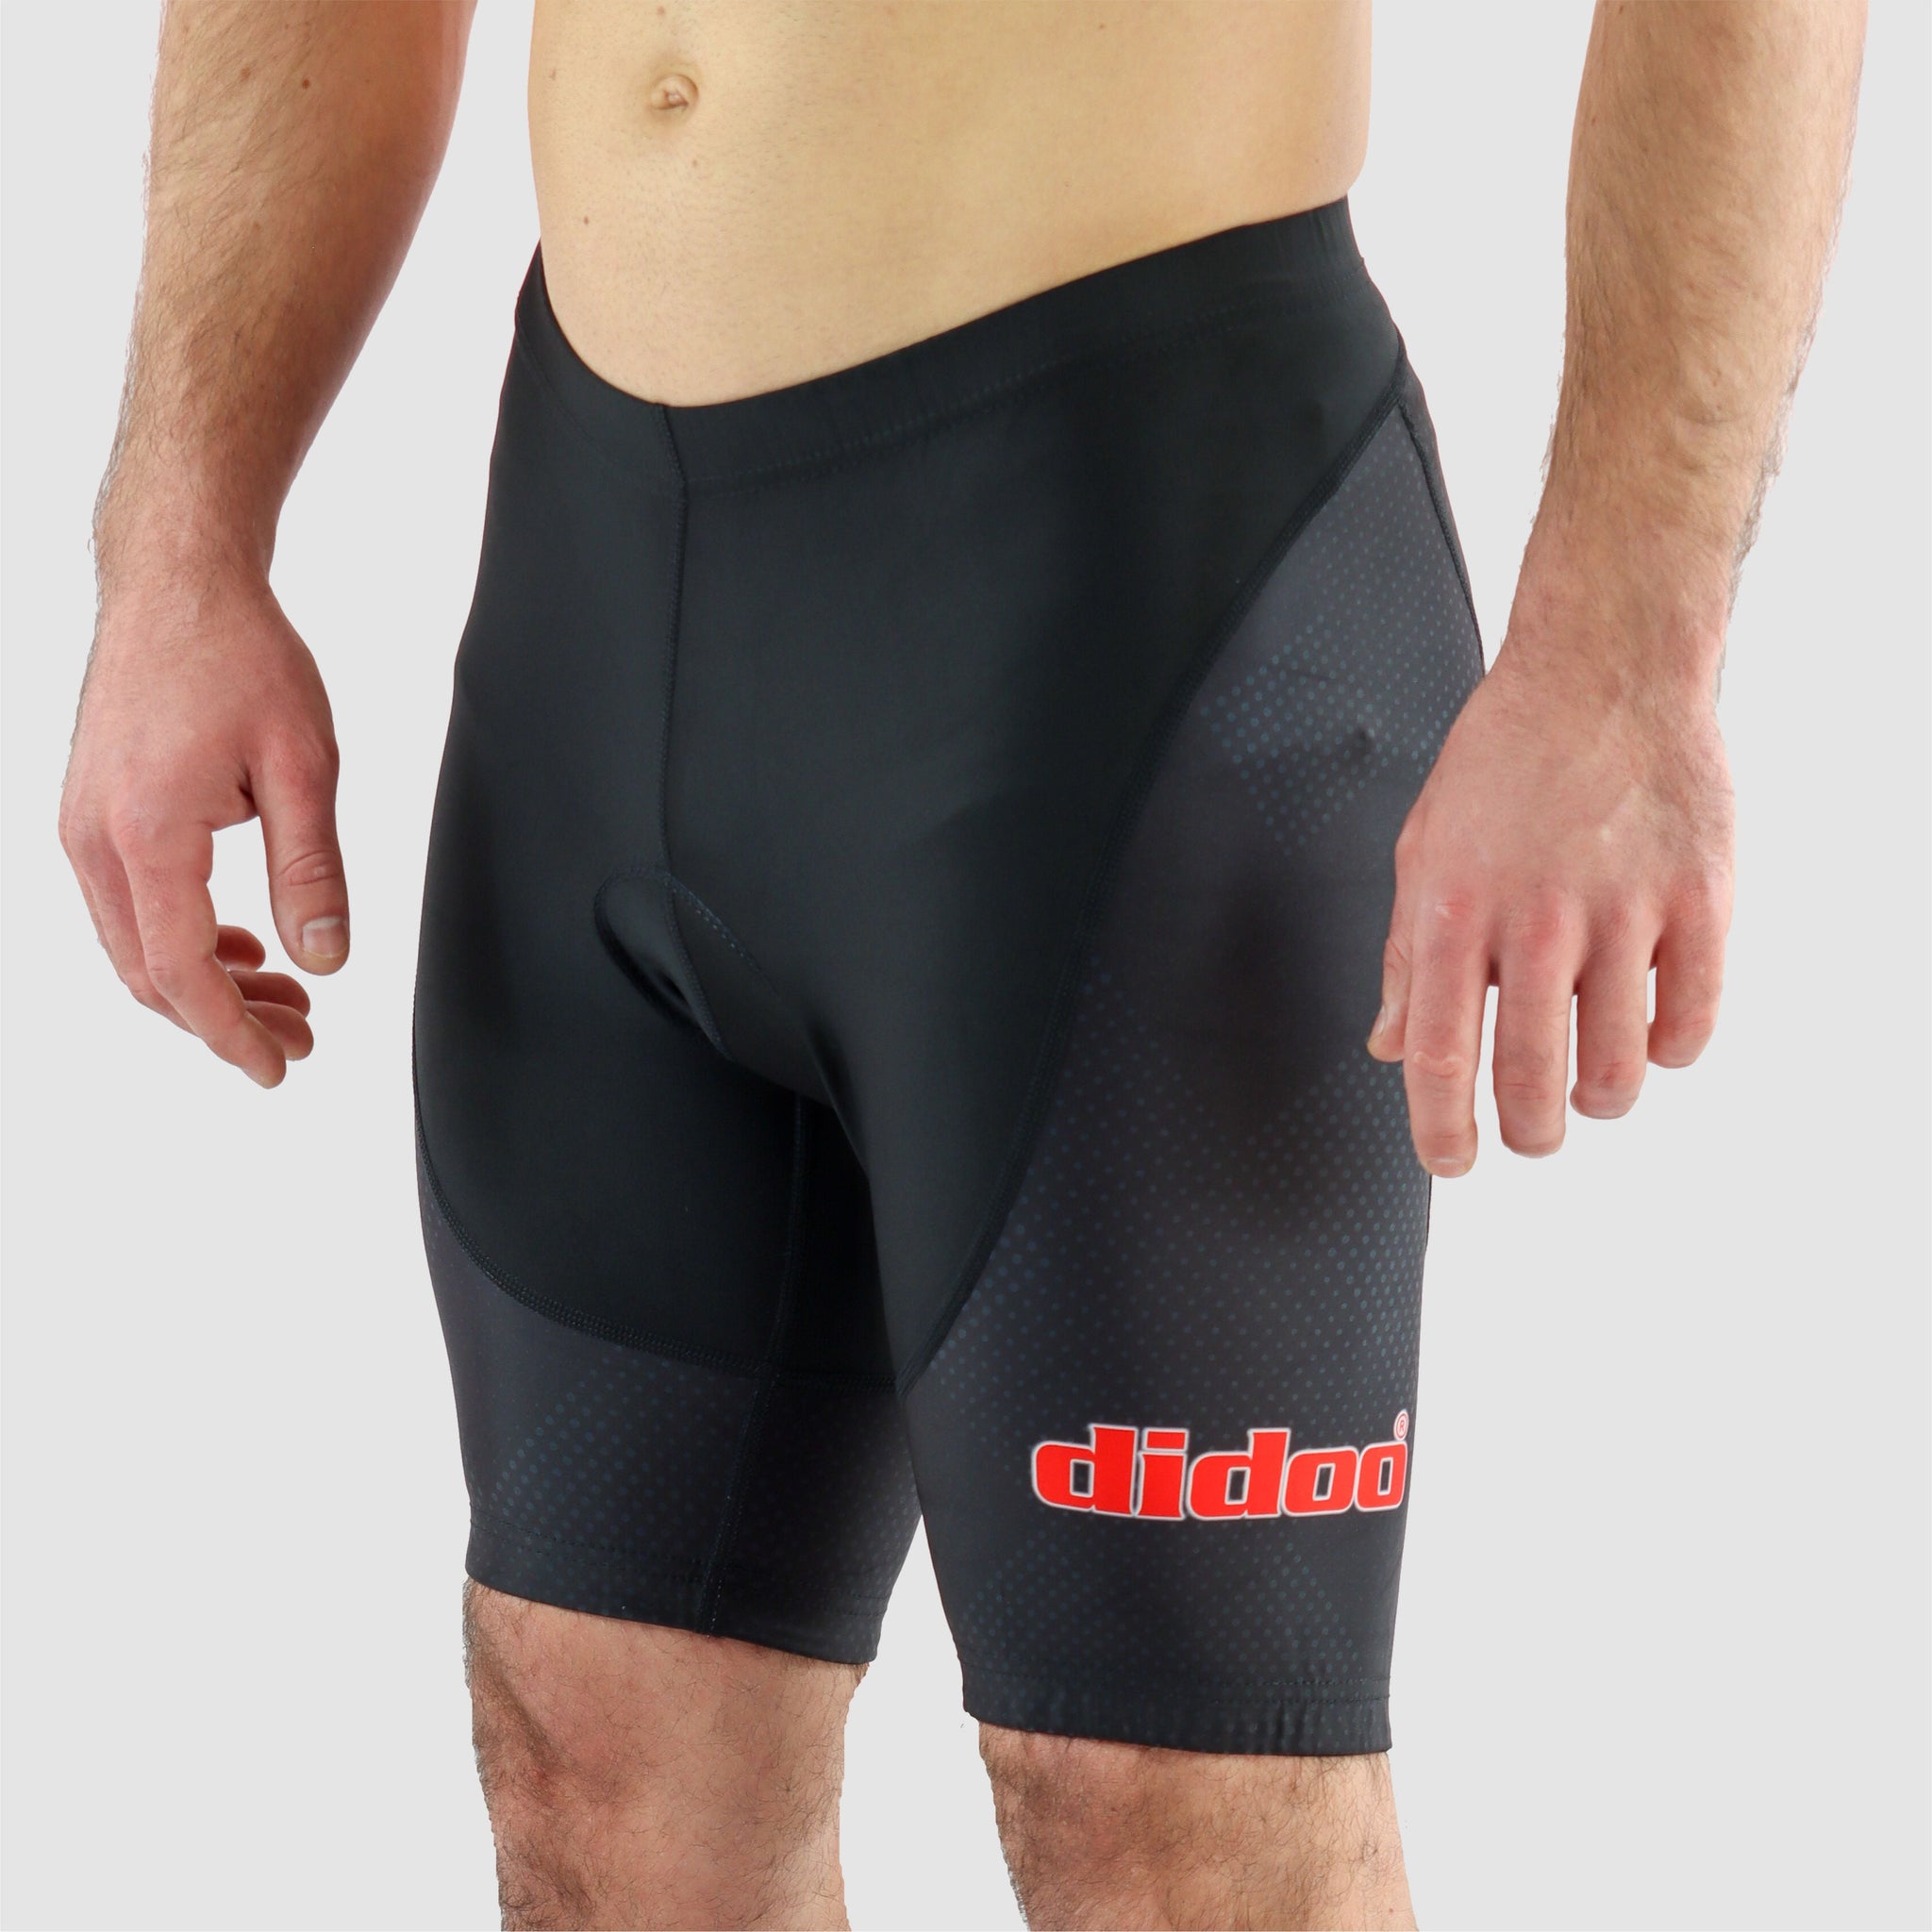 DiDOO Men's Classic Quick Dry Padded Cycling Shorts Black and Grey